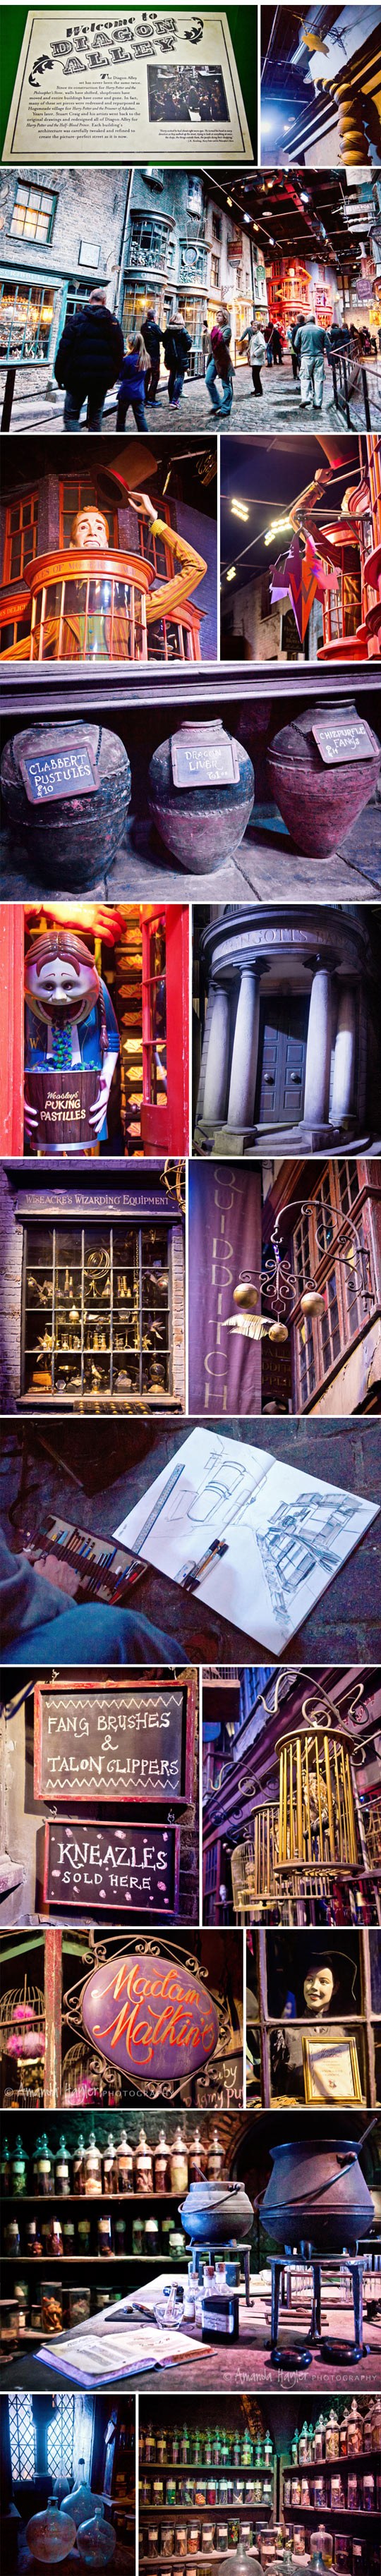 Welcome to Diagon Alley.